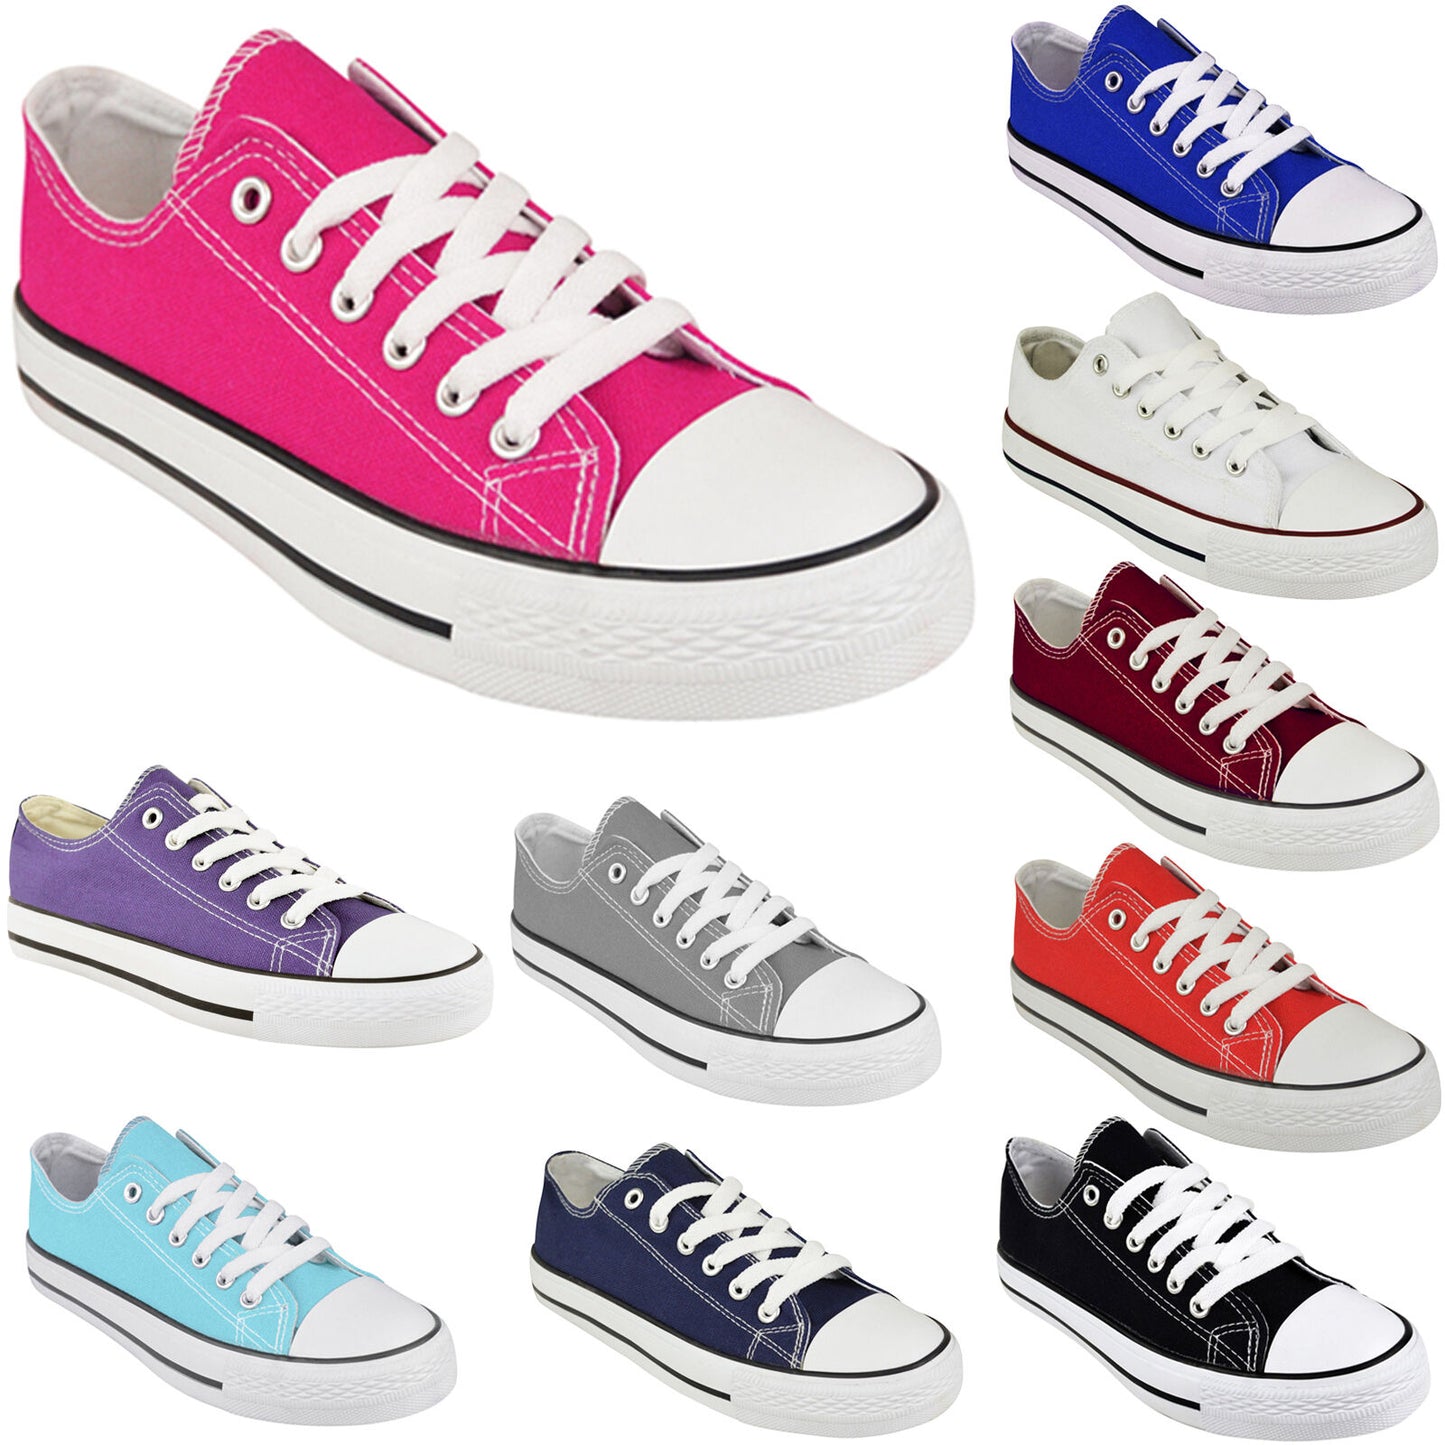 WOMENS CANVAS SHOES LADIES LACE UP PLIMSOLLS PUMPS SNEAKERS TRAINERS SKATERS